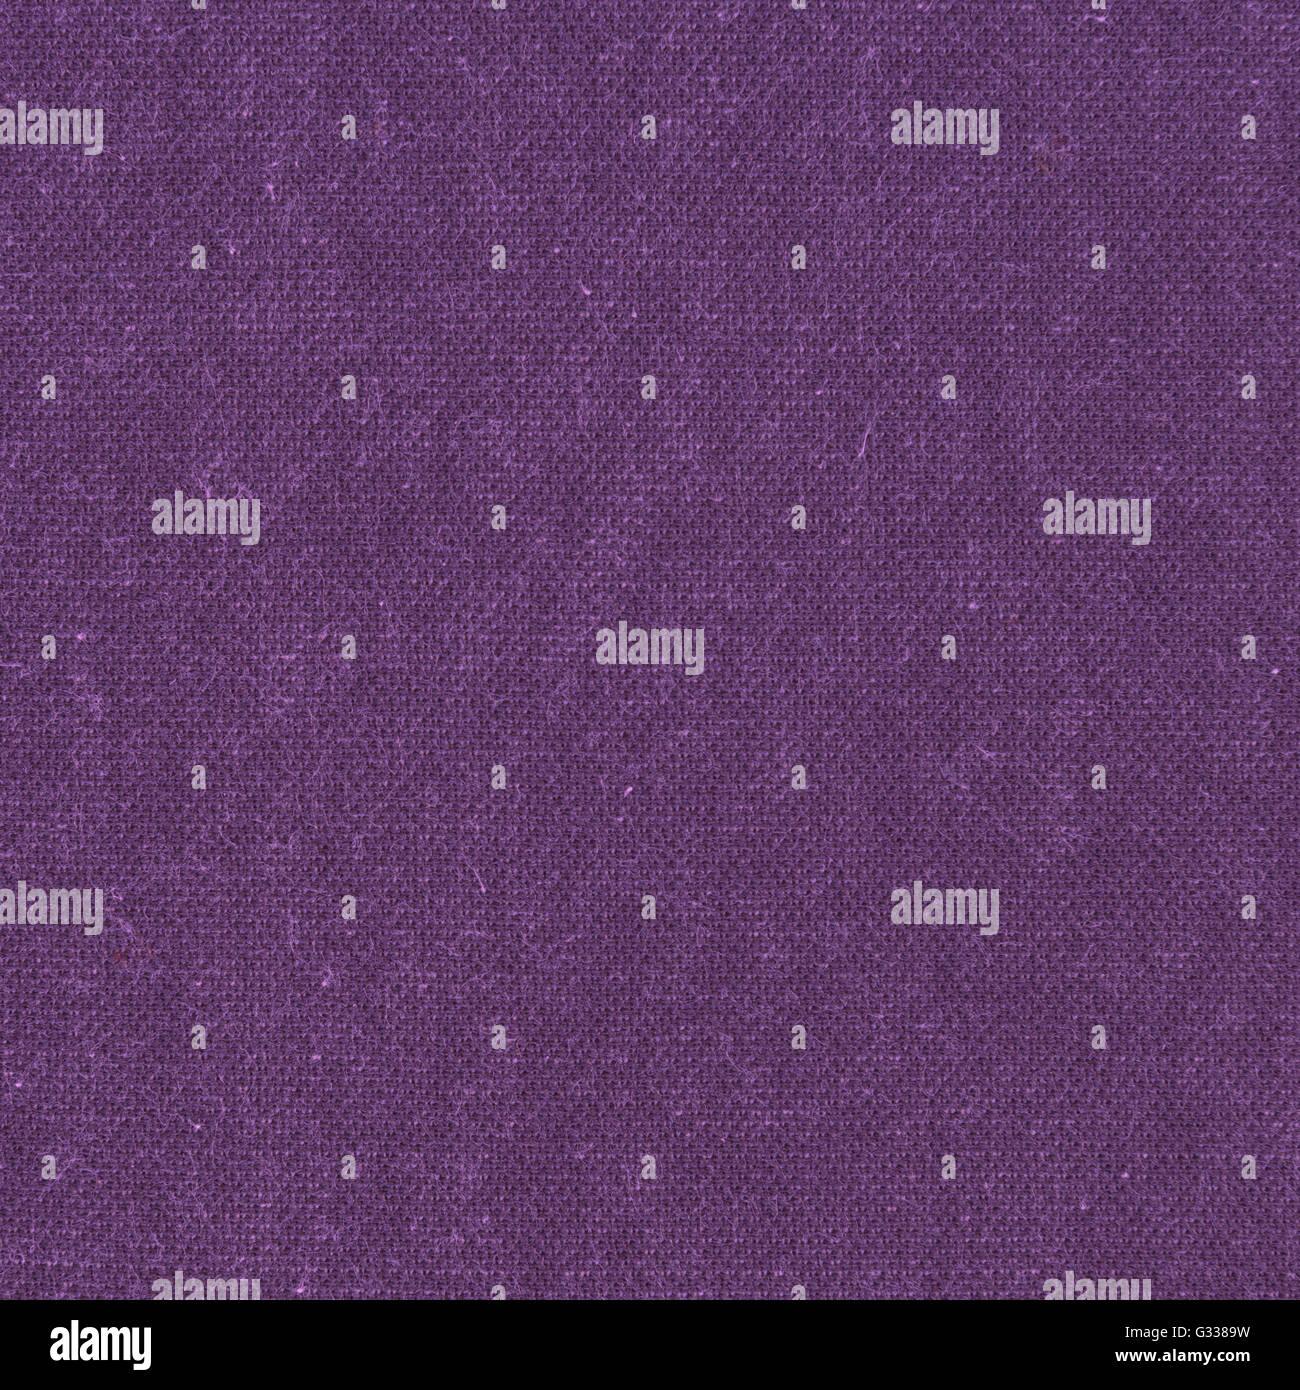 Purple wool knitted fabric texture. Close up fragment of the top view. Stock Photo